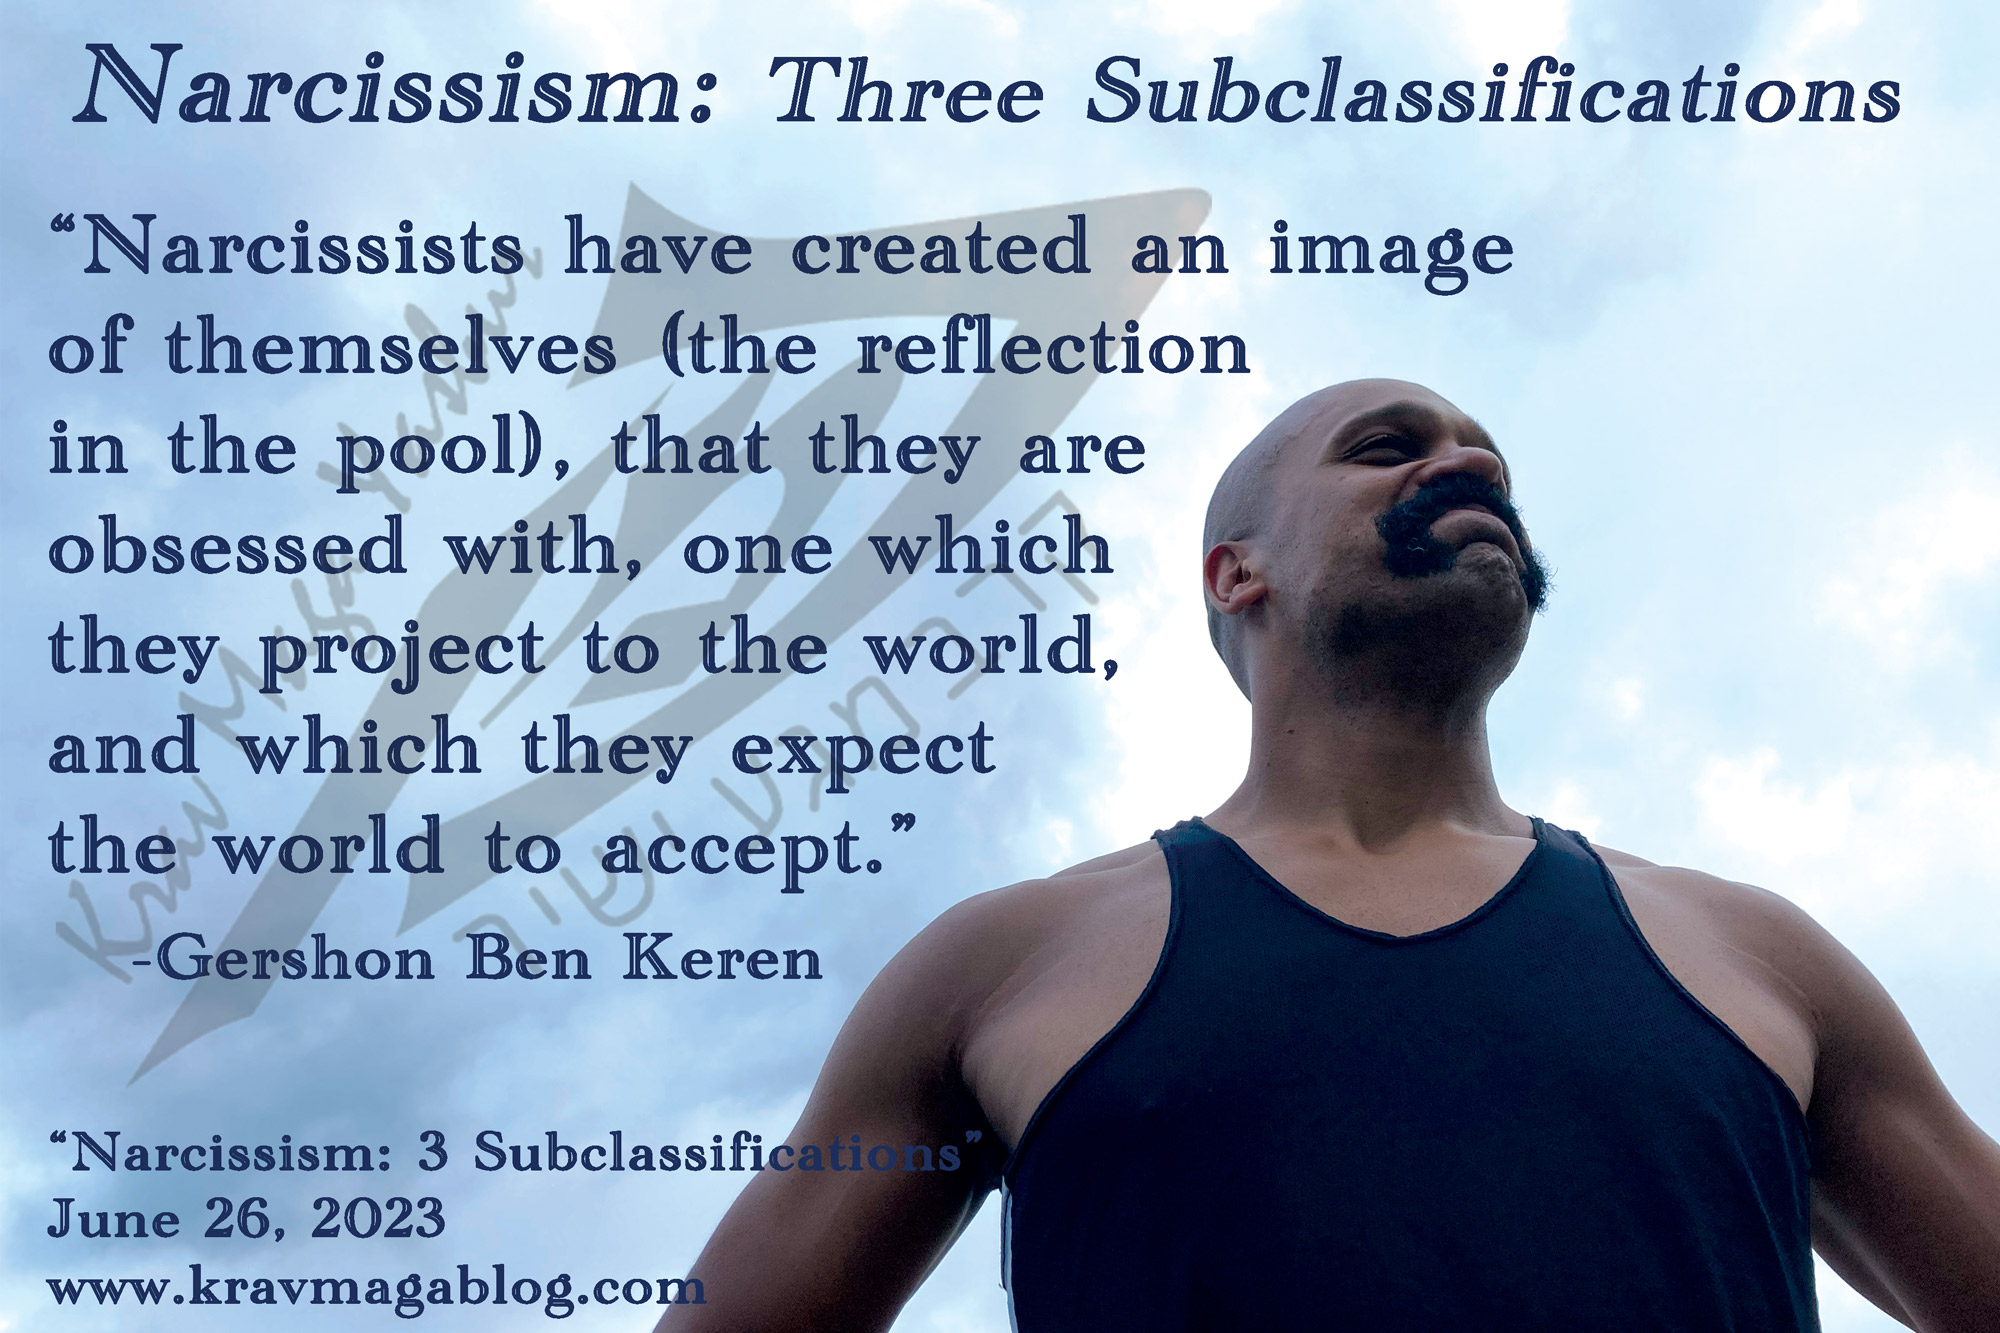 Blog About Narcissism: Three Subclassifications